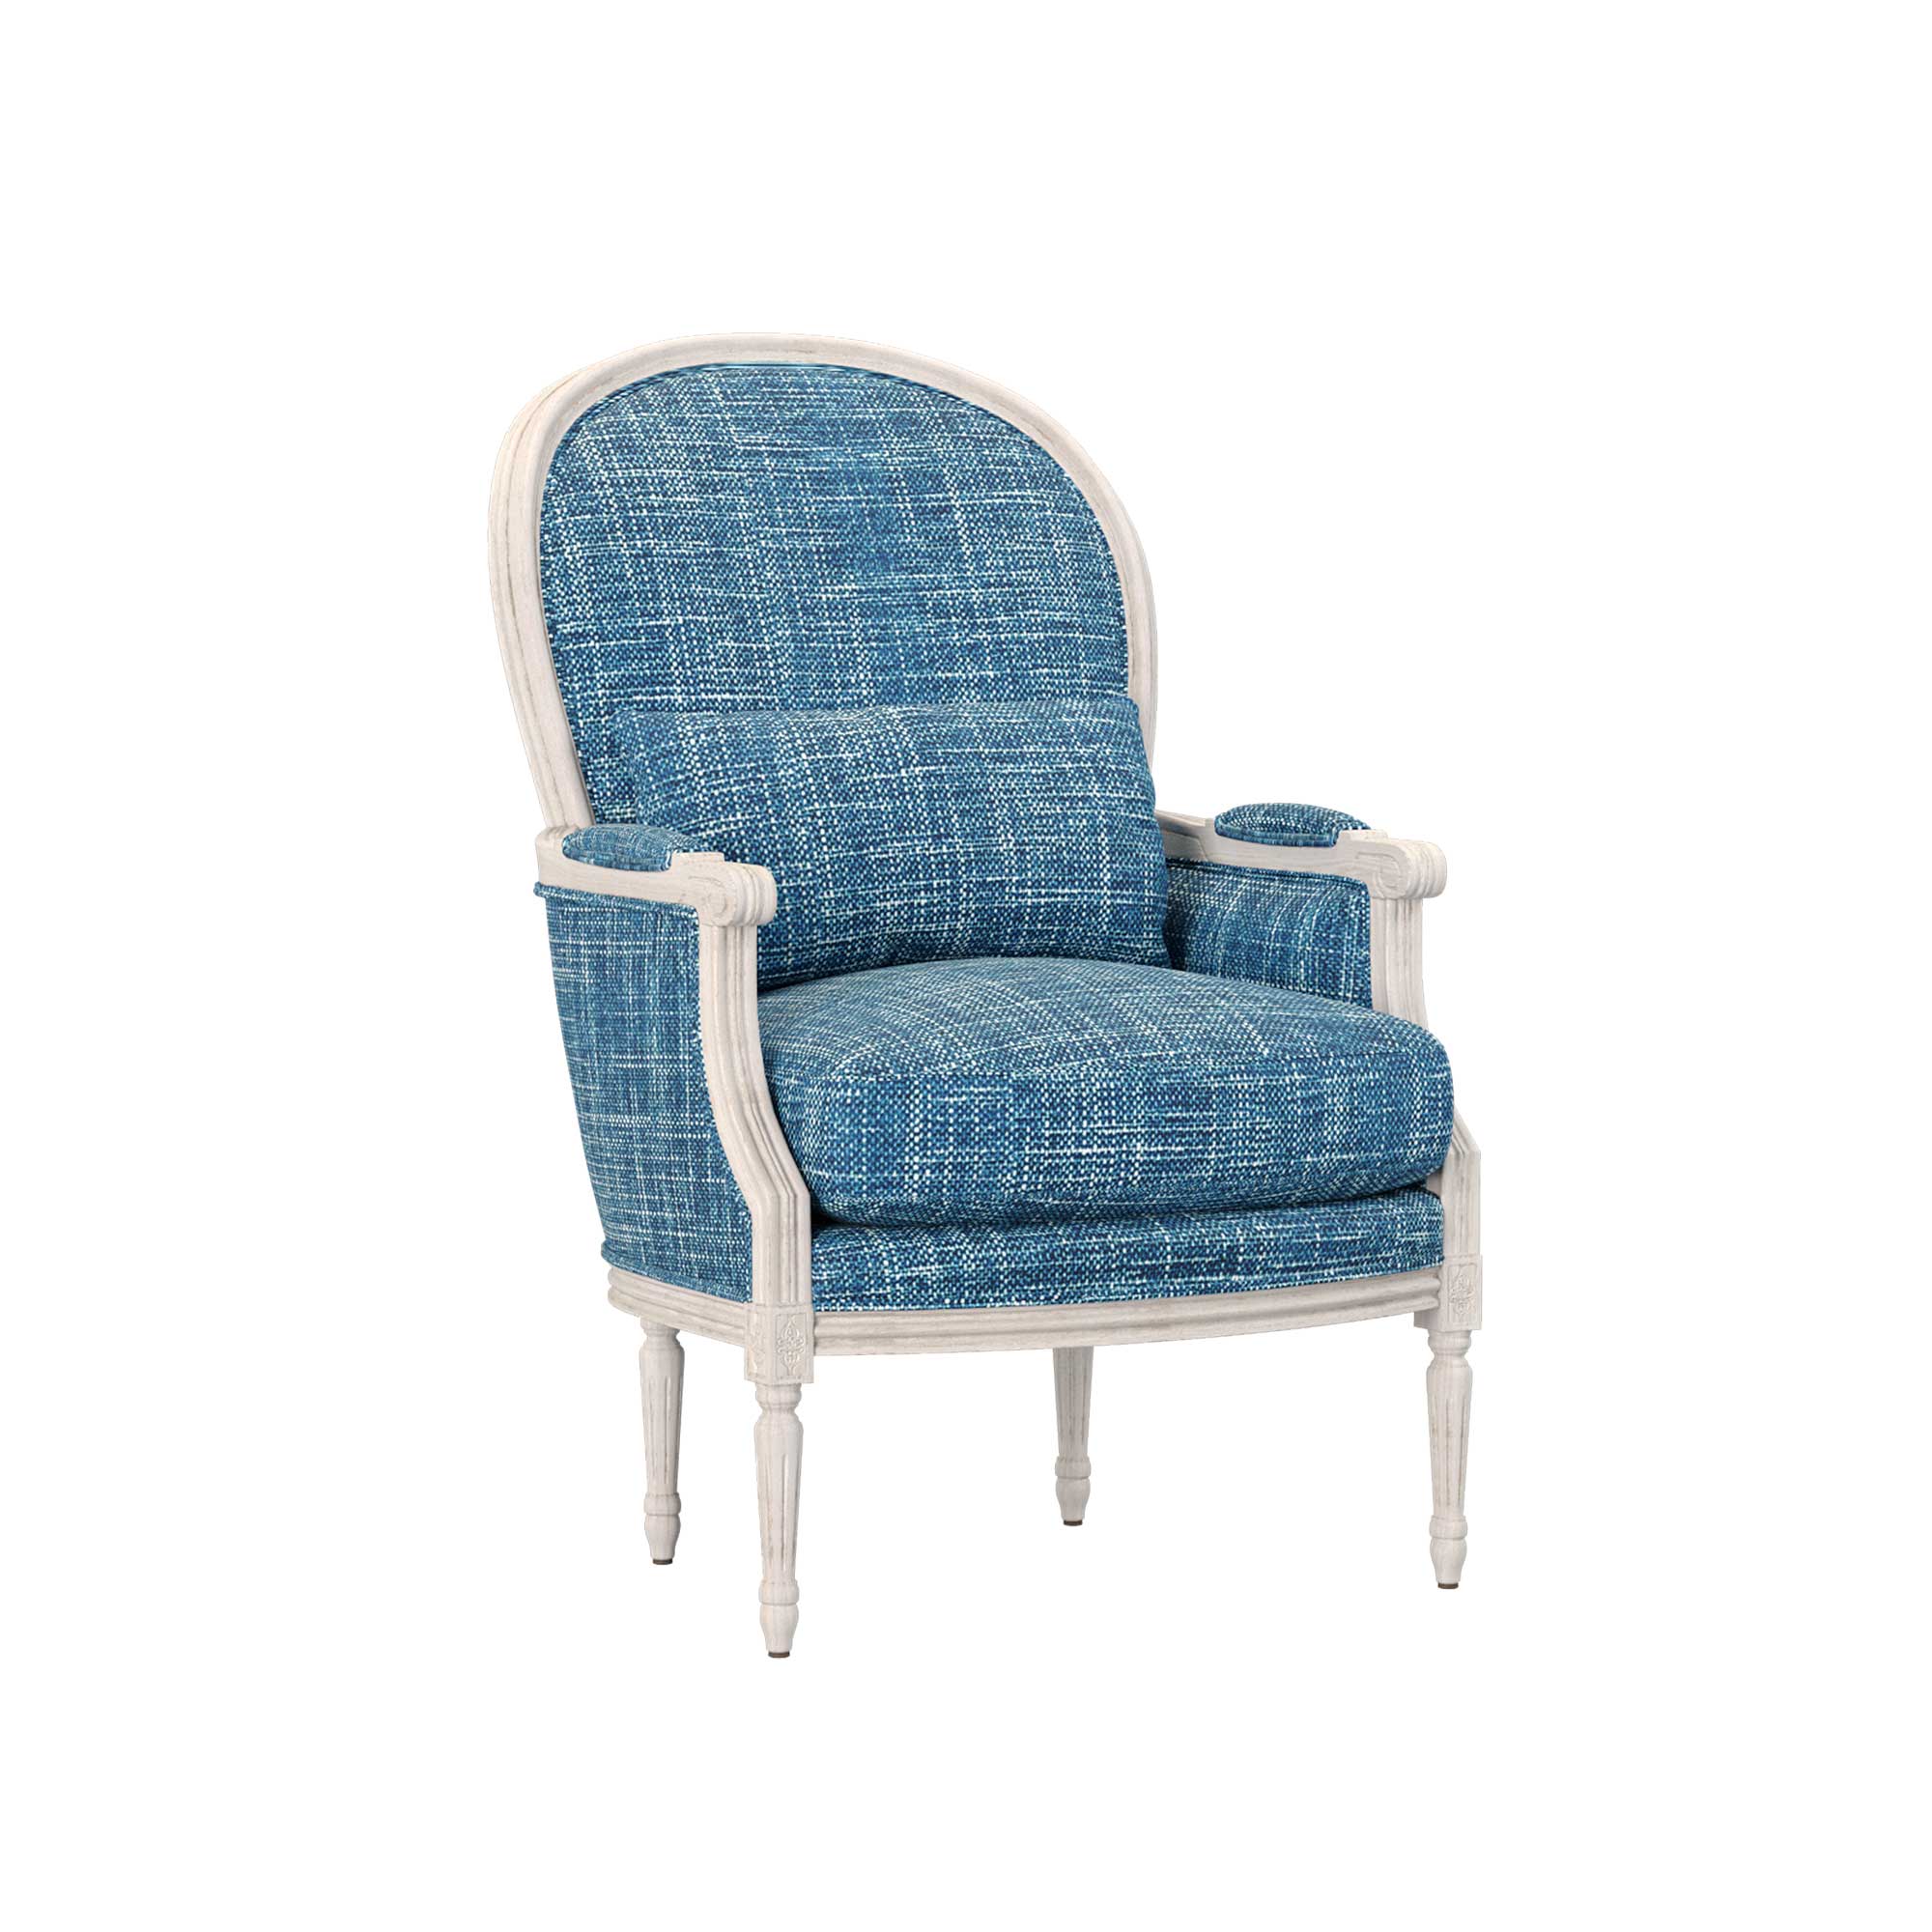 Upholstered Adele Lounge Chair in Chenille Blue